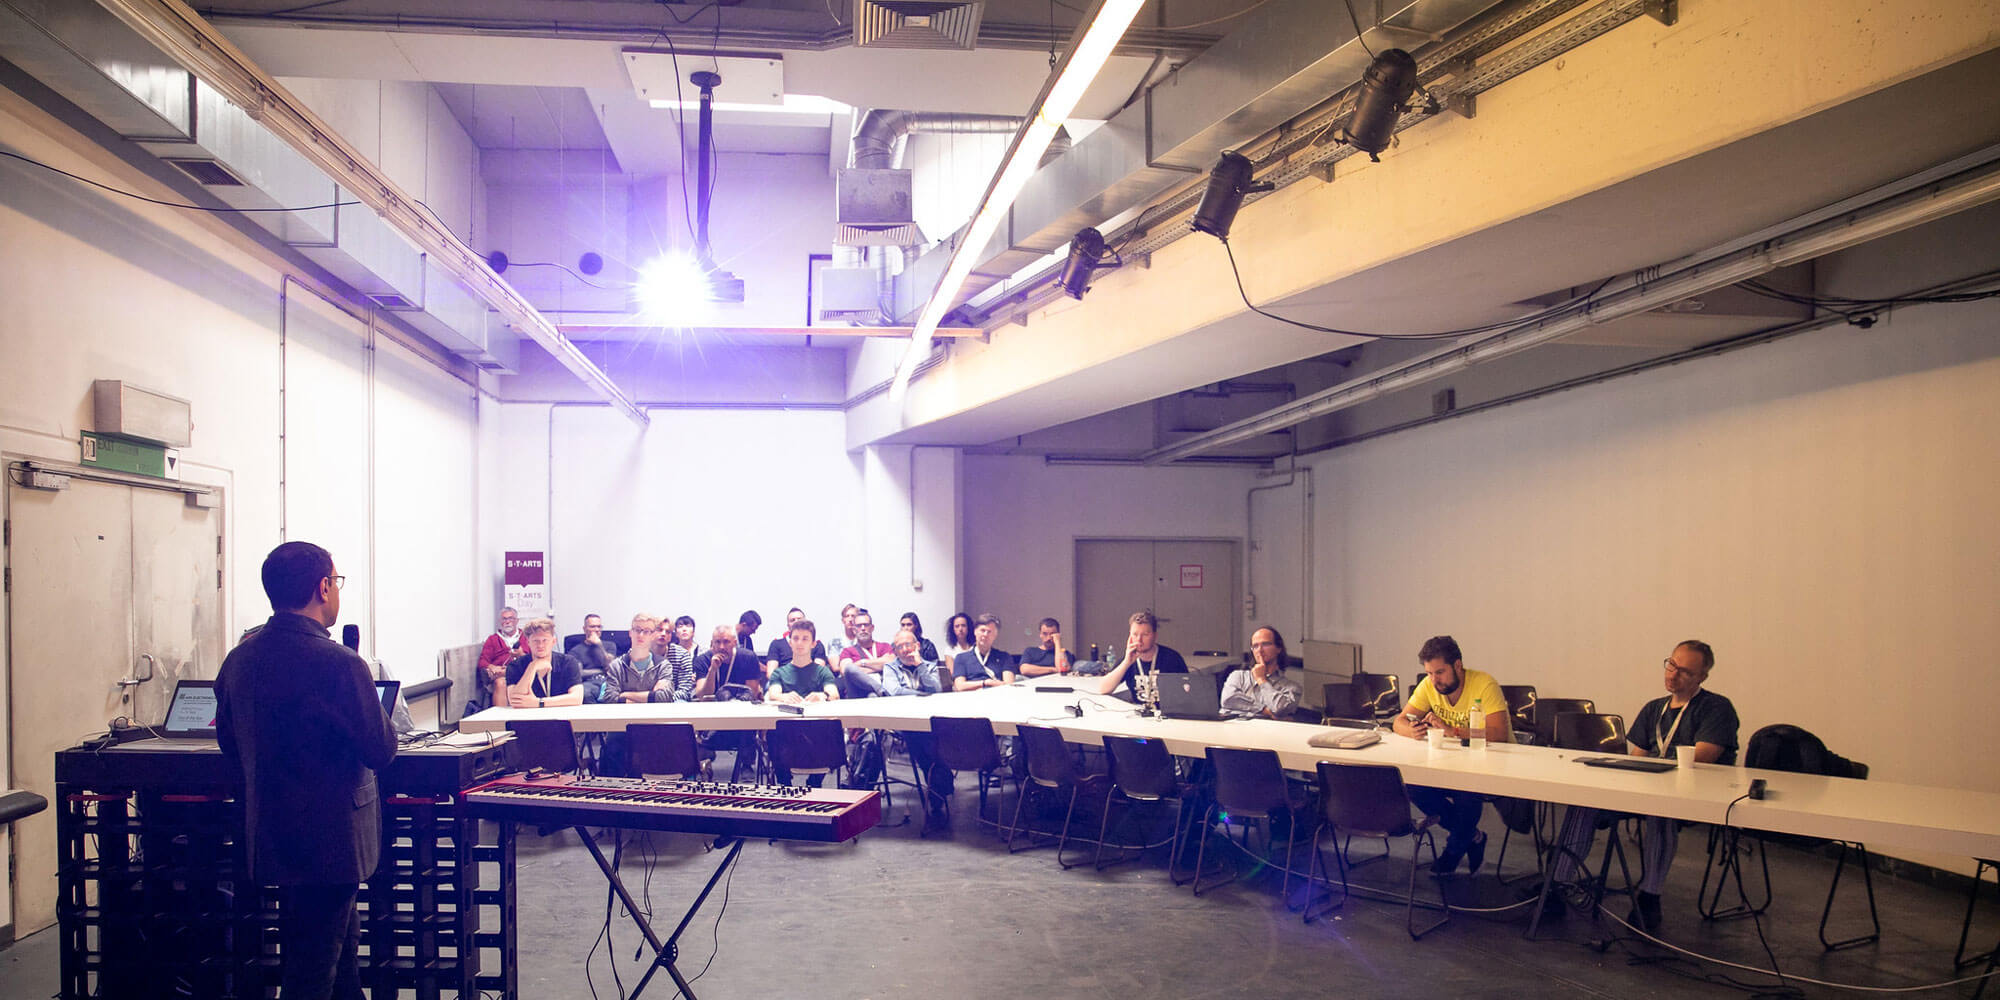 Open Futurelab 2019: A workshop with artist and researcher Ali Nikrang from the Ars Electronica Futurelab focused on current technical approaches to automatic music generation.